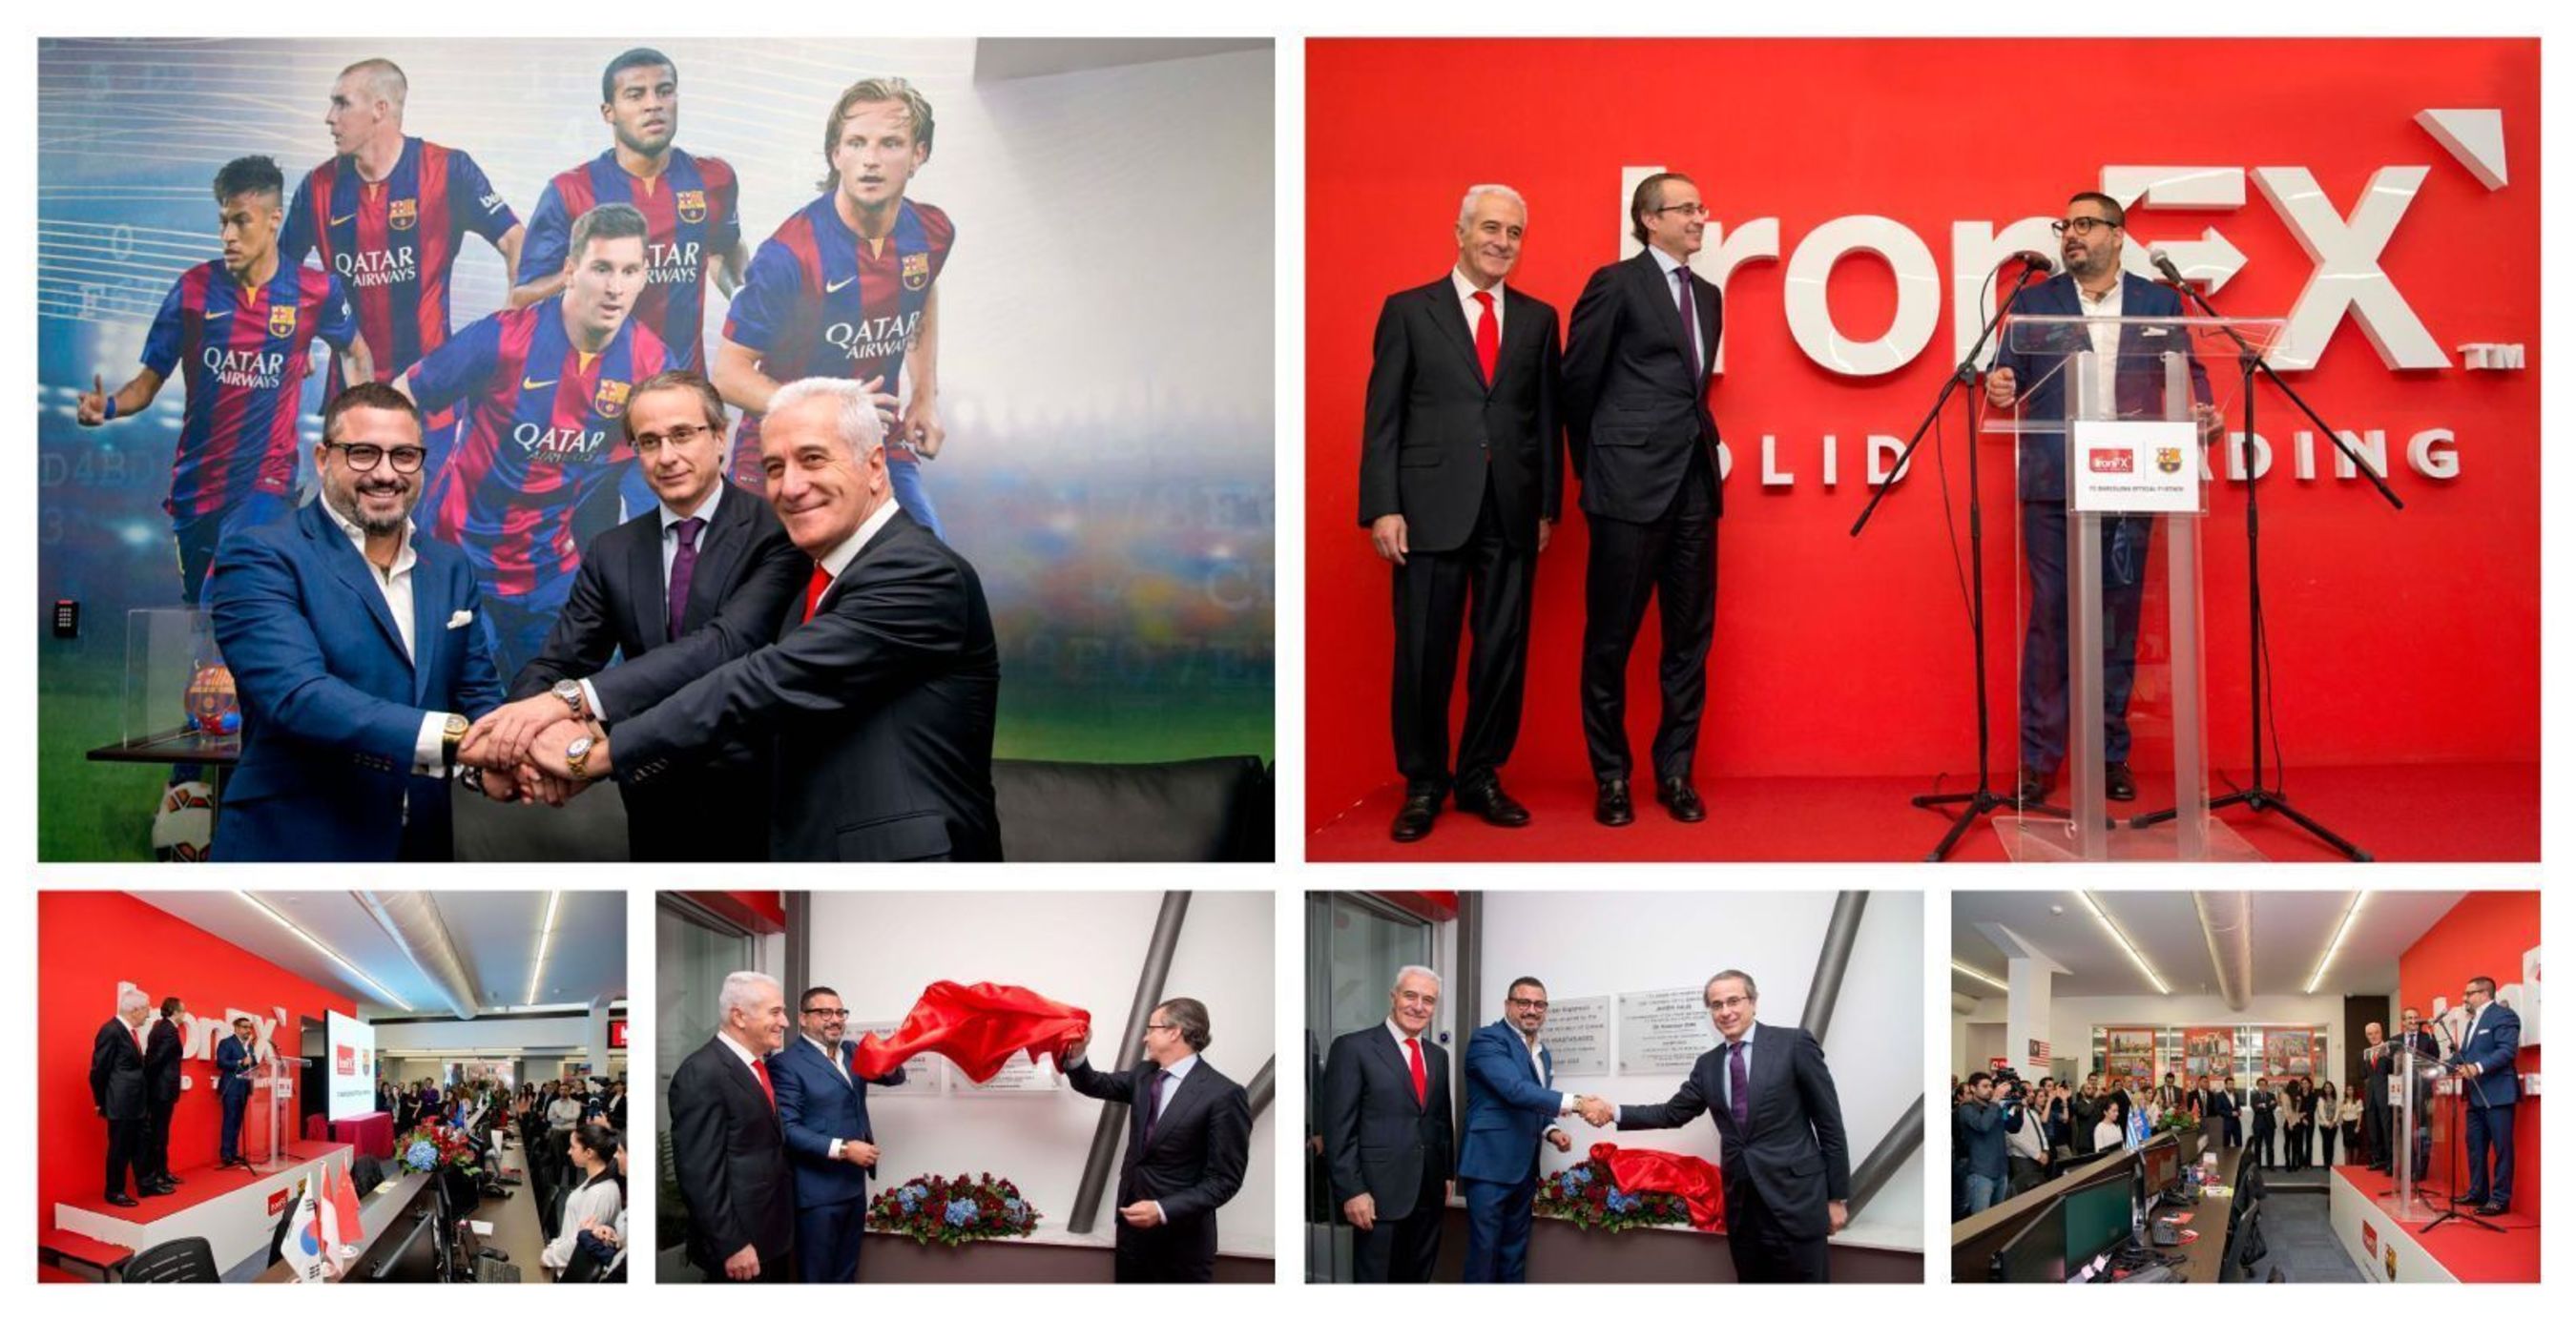 A UNION OF TWO GLOBAL LEADERS âeuro" Vice President of FC Barcelona Javier Faus inaugurates IronFX Global Headquarters in Limassol (PRNewsFoto/IronFX Global Limited)